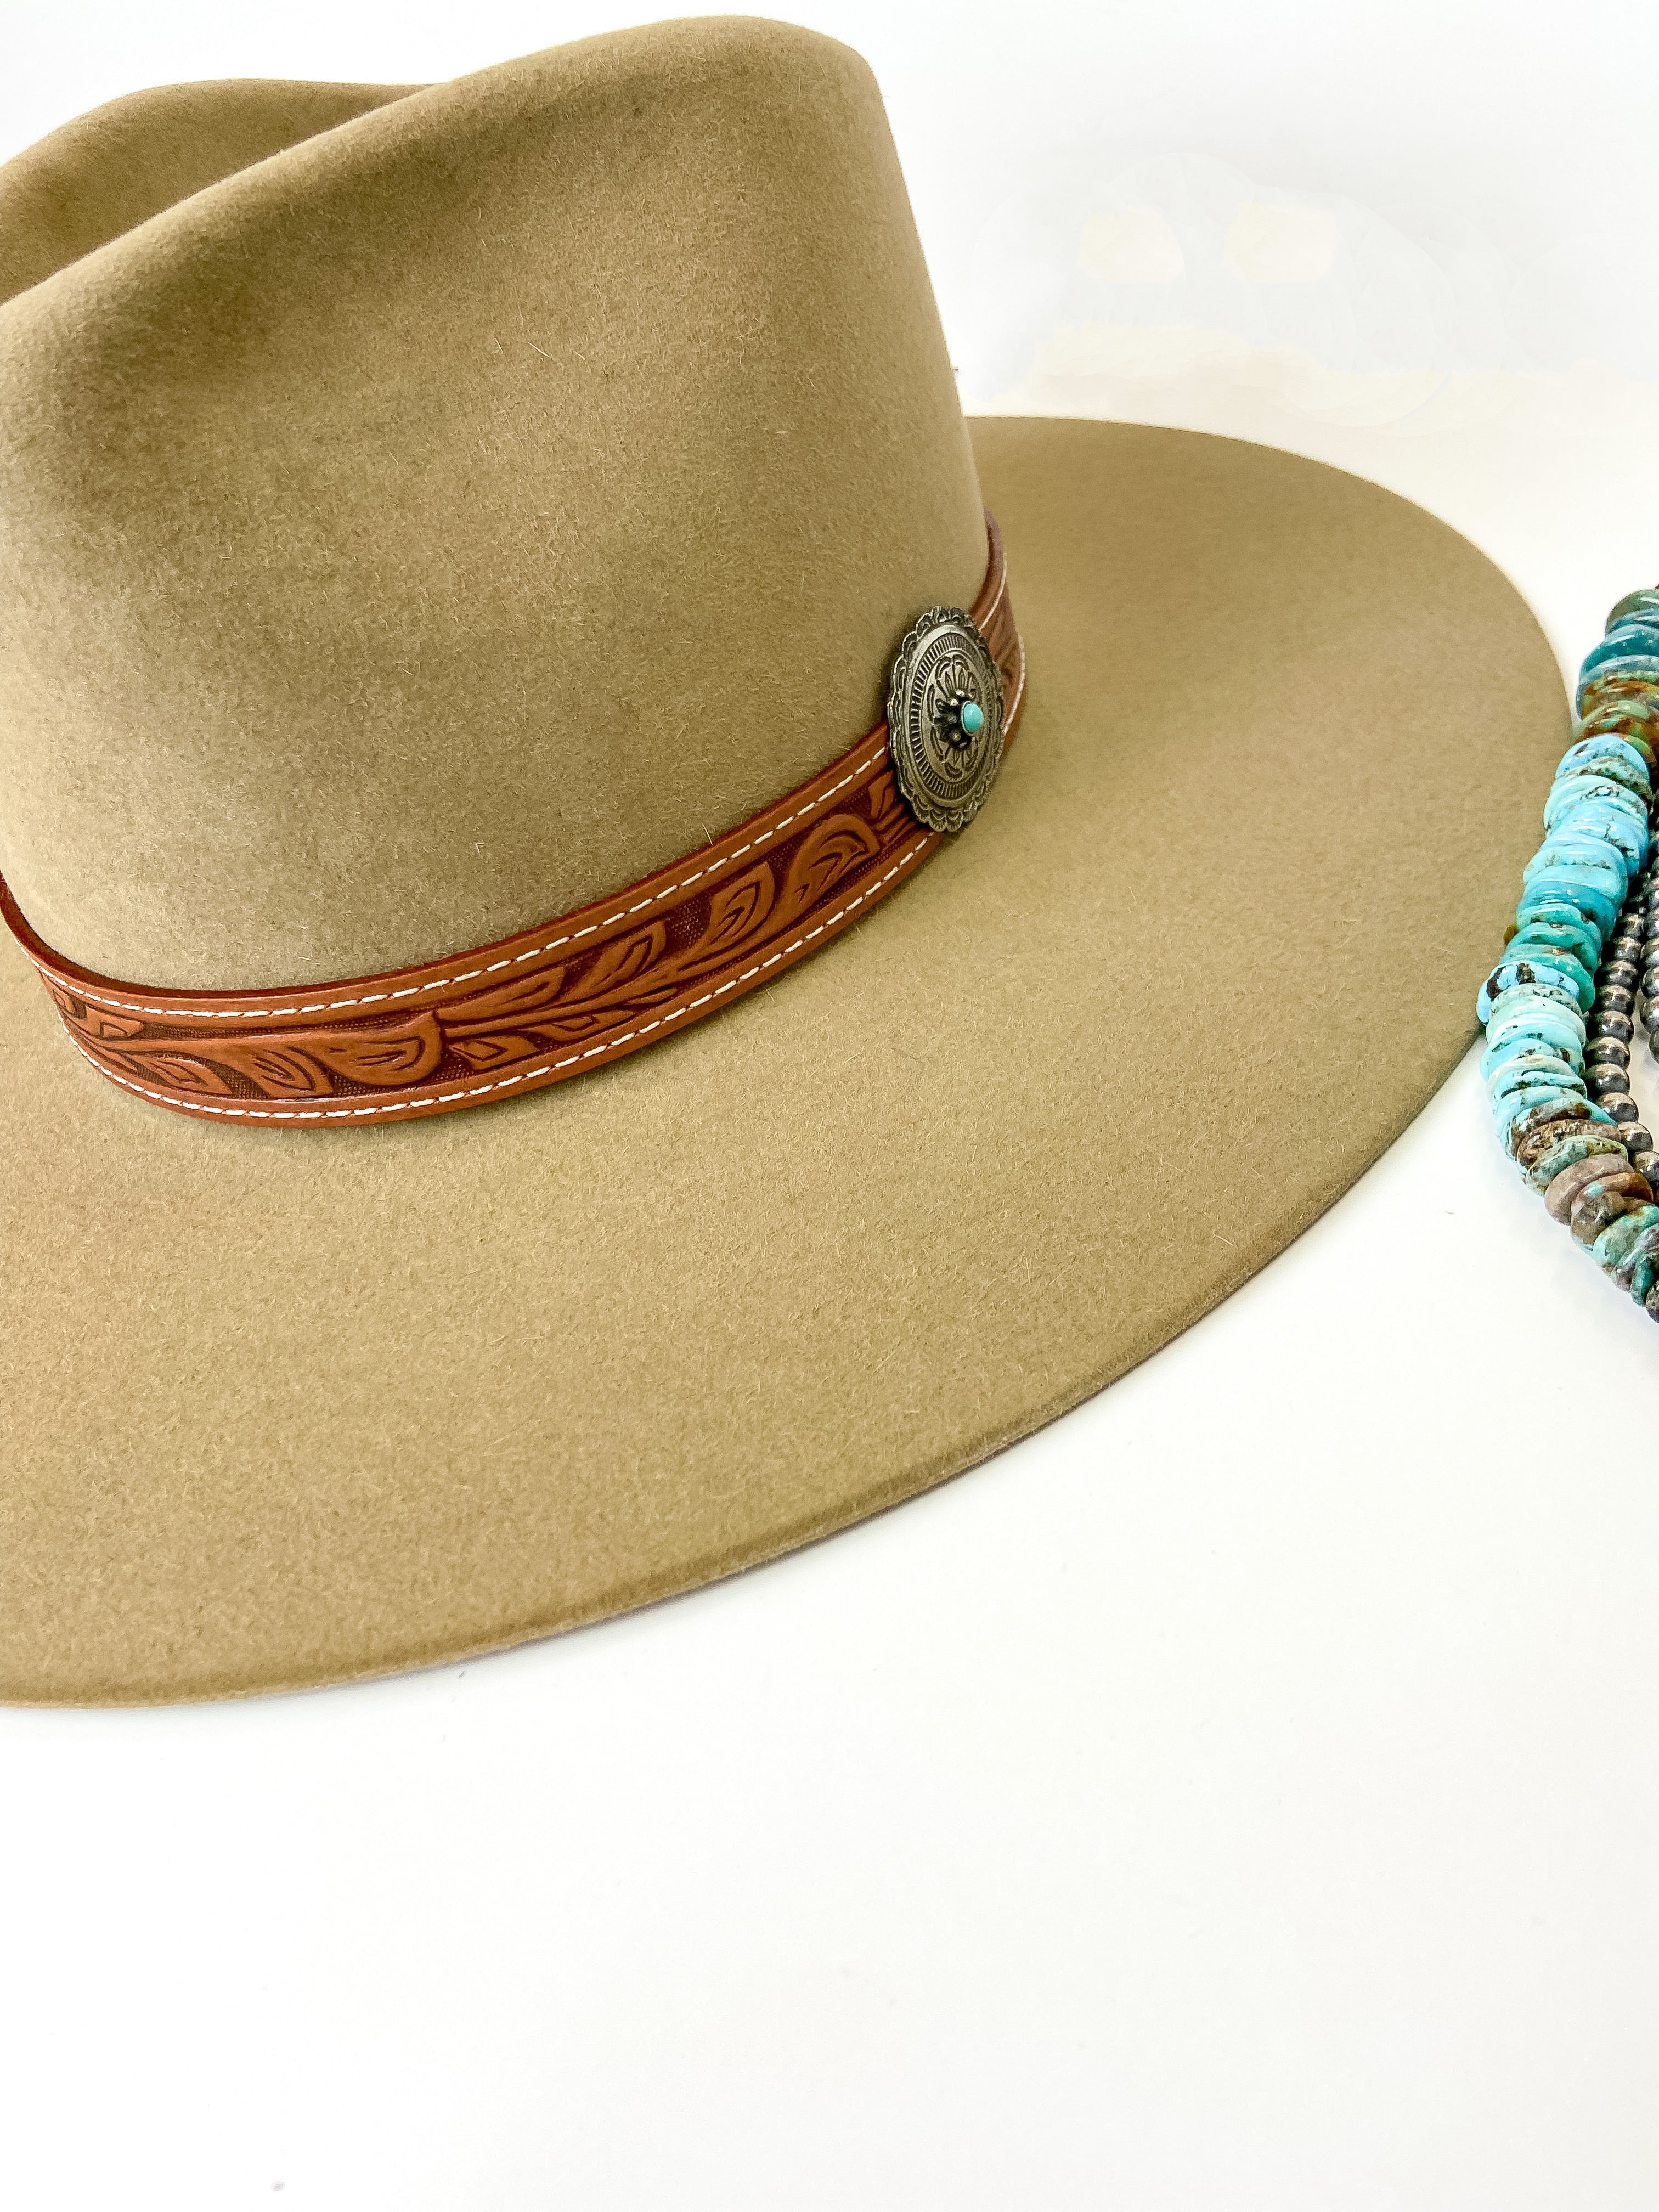 Charlie 1 Horse | Lori Wool Felt Hat with Leather Tooled Band and Silver Concho in Fawn Brown